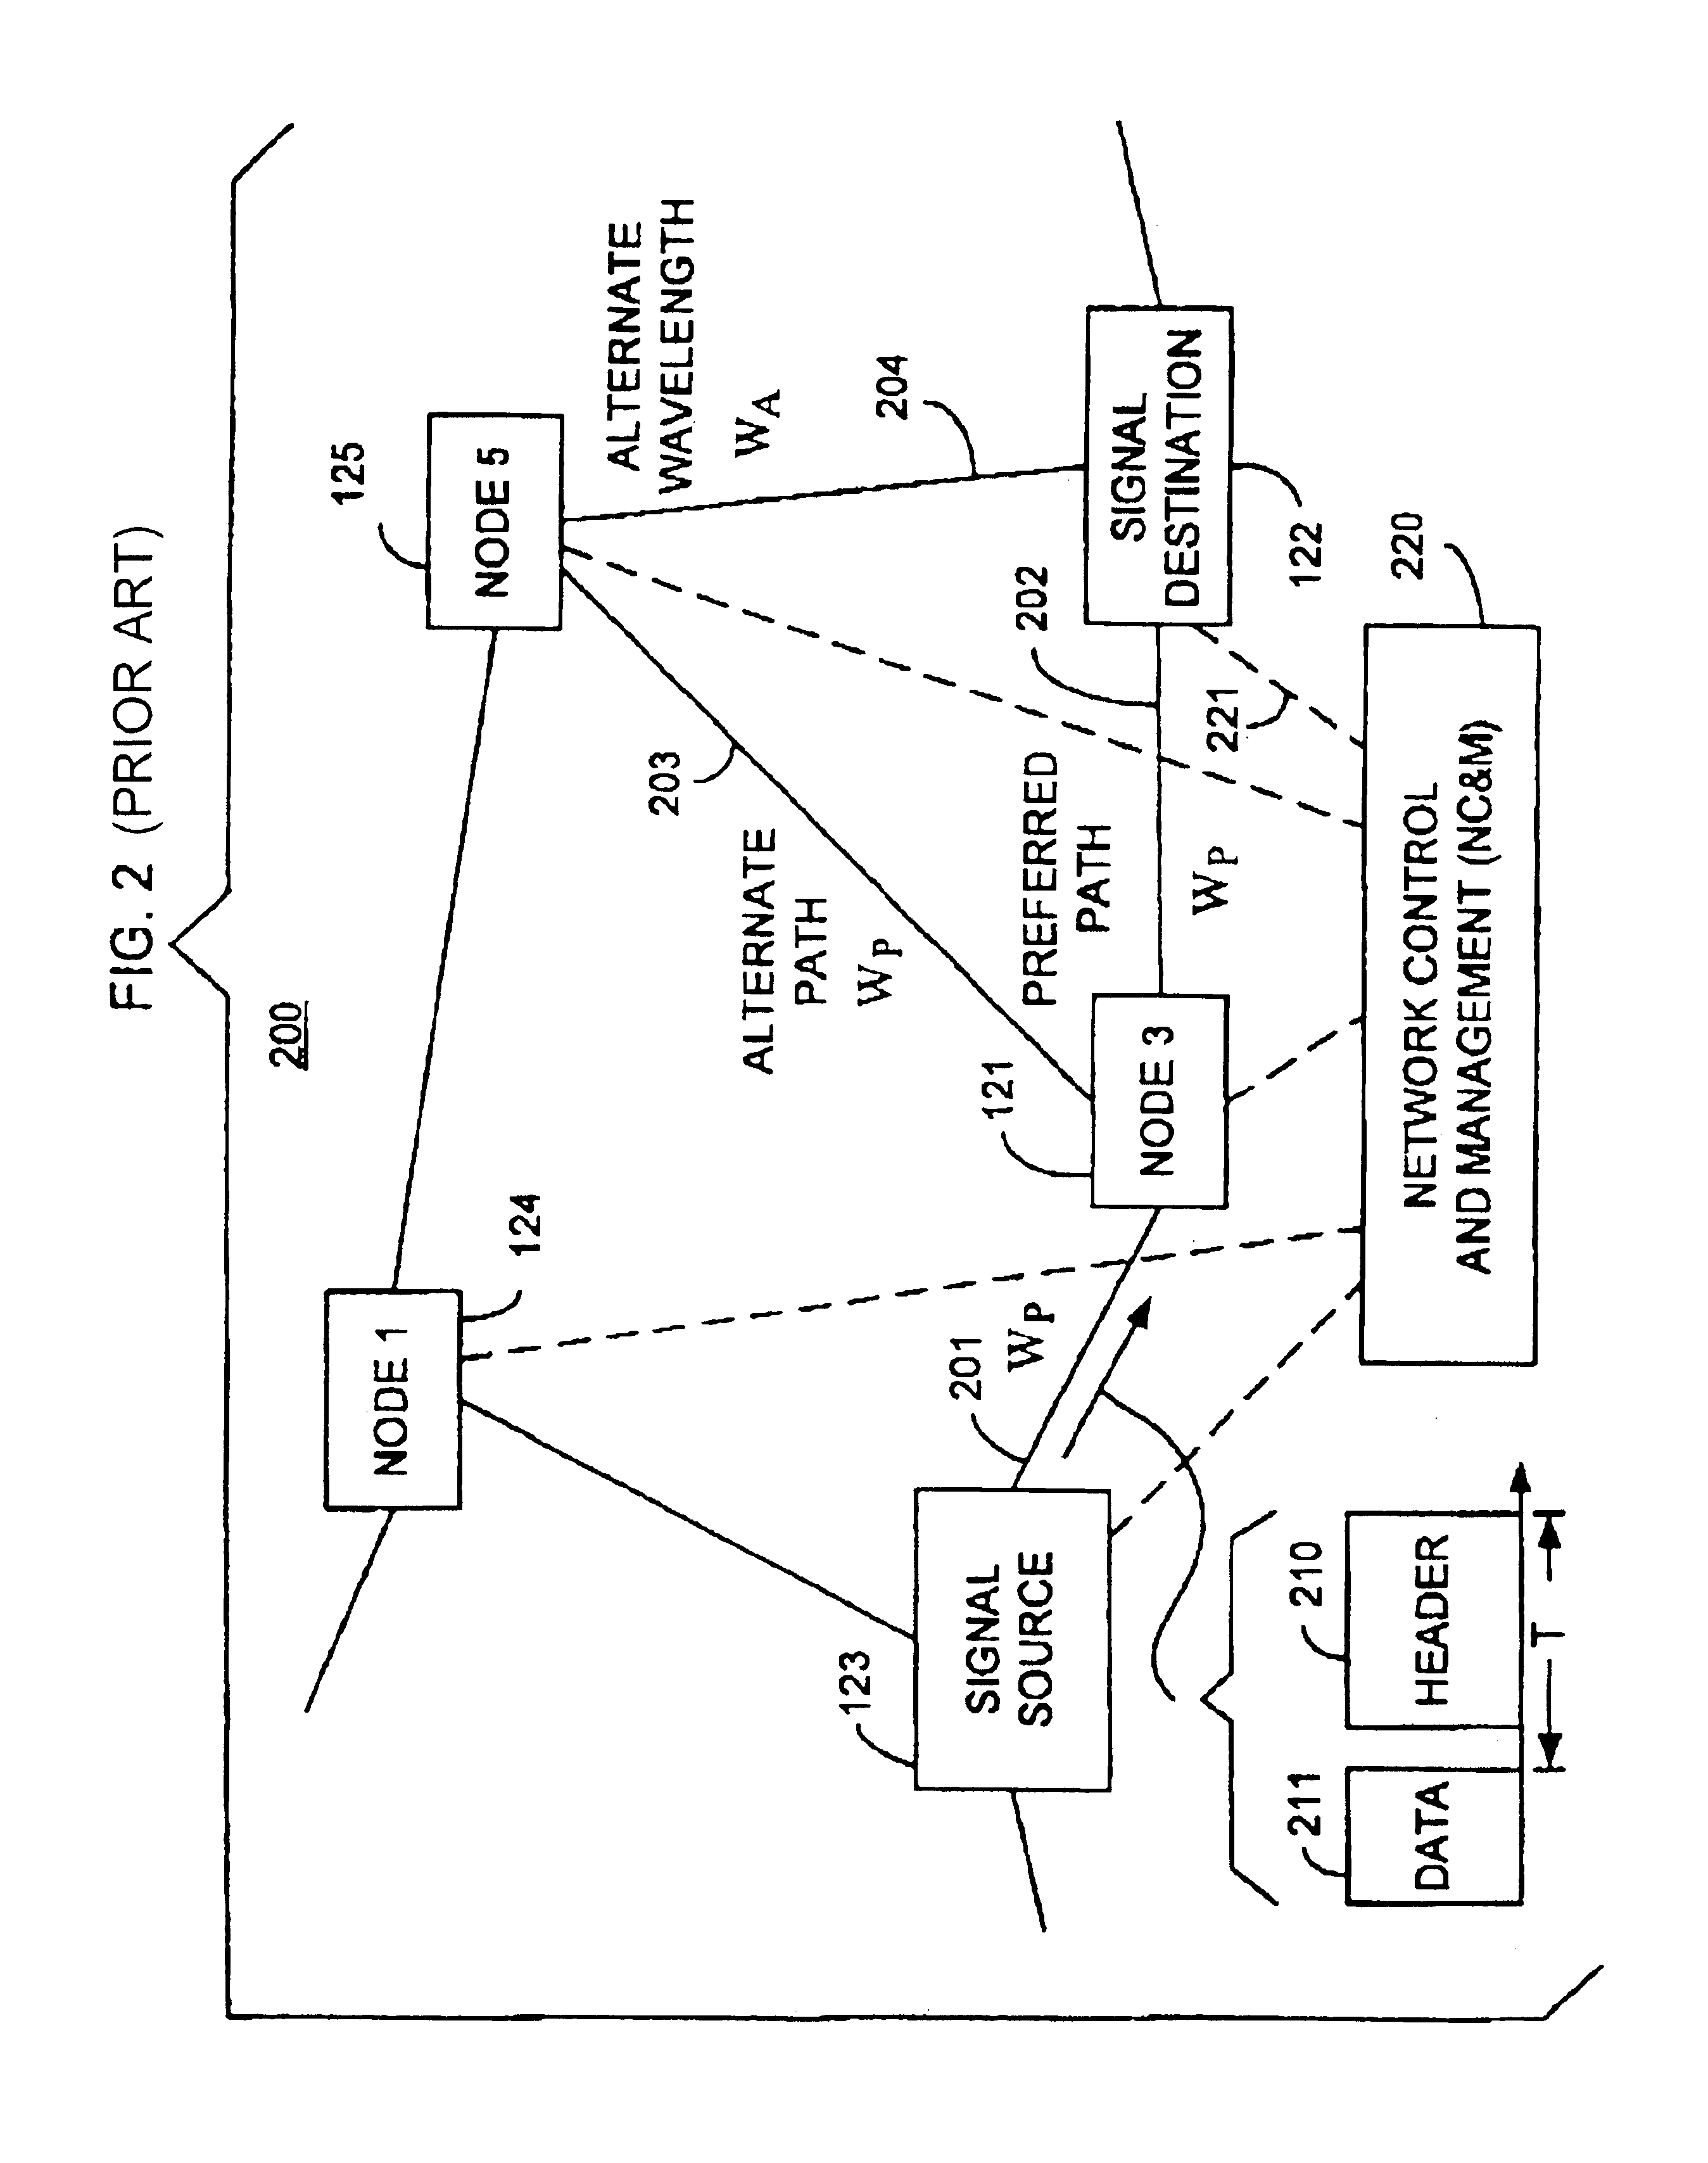 Optical layer multicasting using a single sub-carrier header and a multicast switch with active header insertion via light circulation